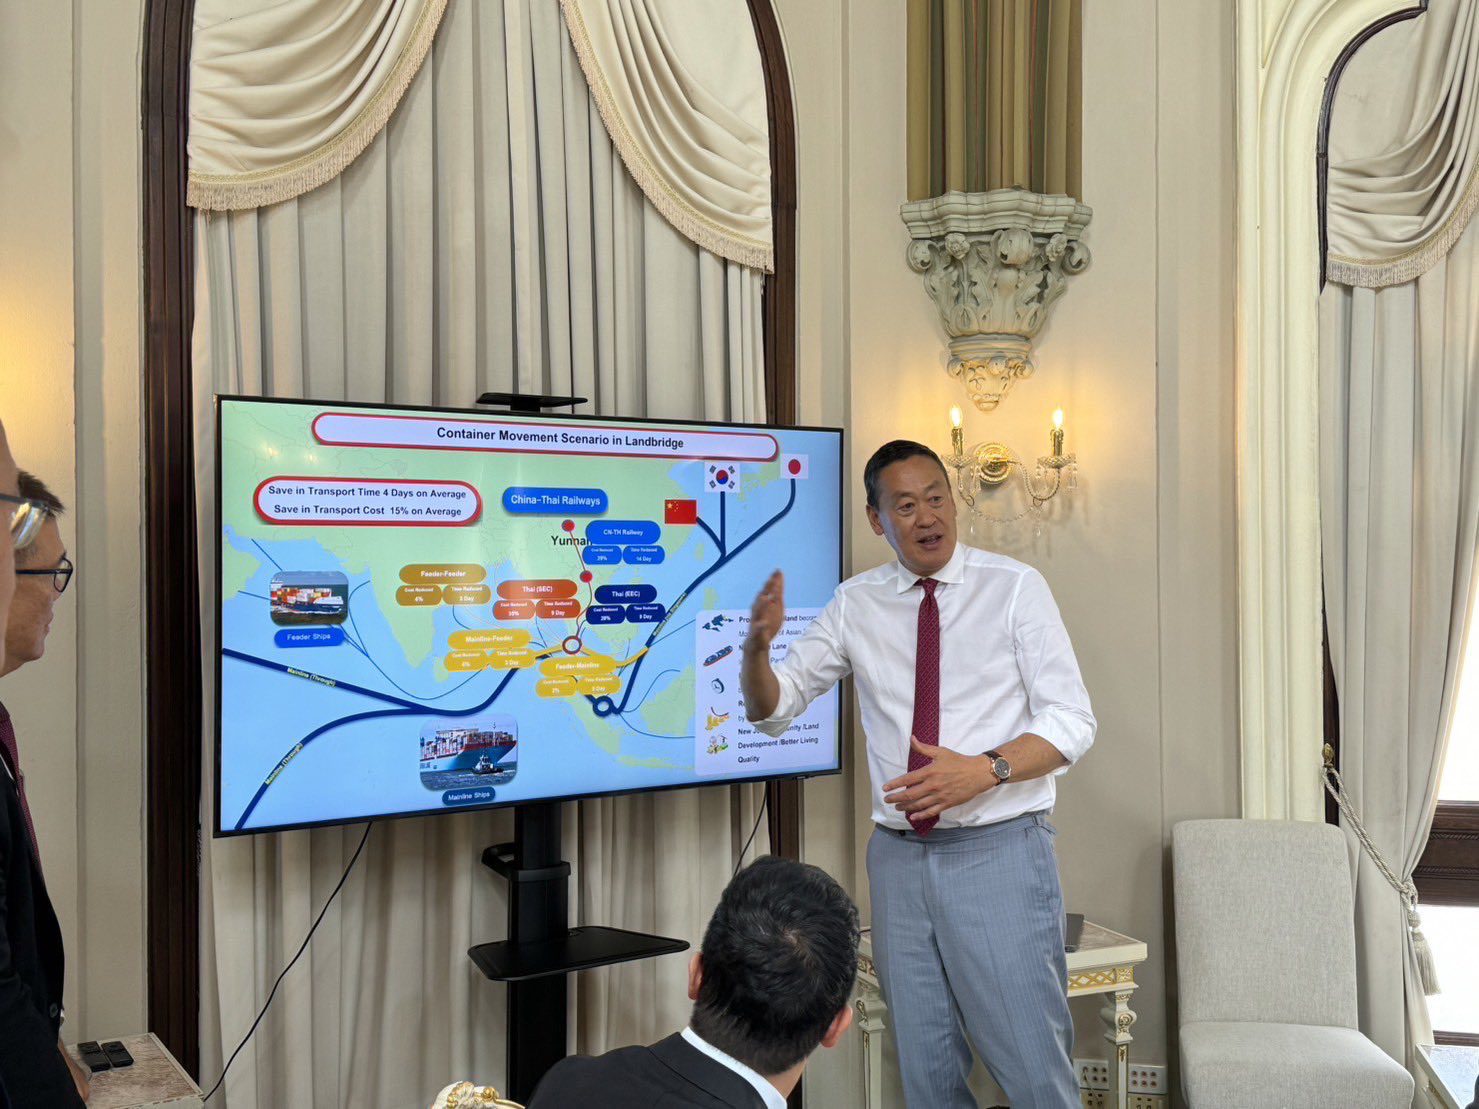 Srettha Thavisin, Prime Minister of Thailand, stands in front of an infographic depicting the Landbridge to bypass the Malacca Strait